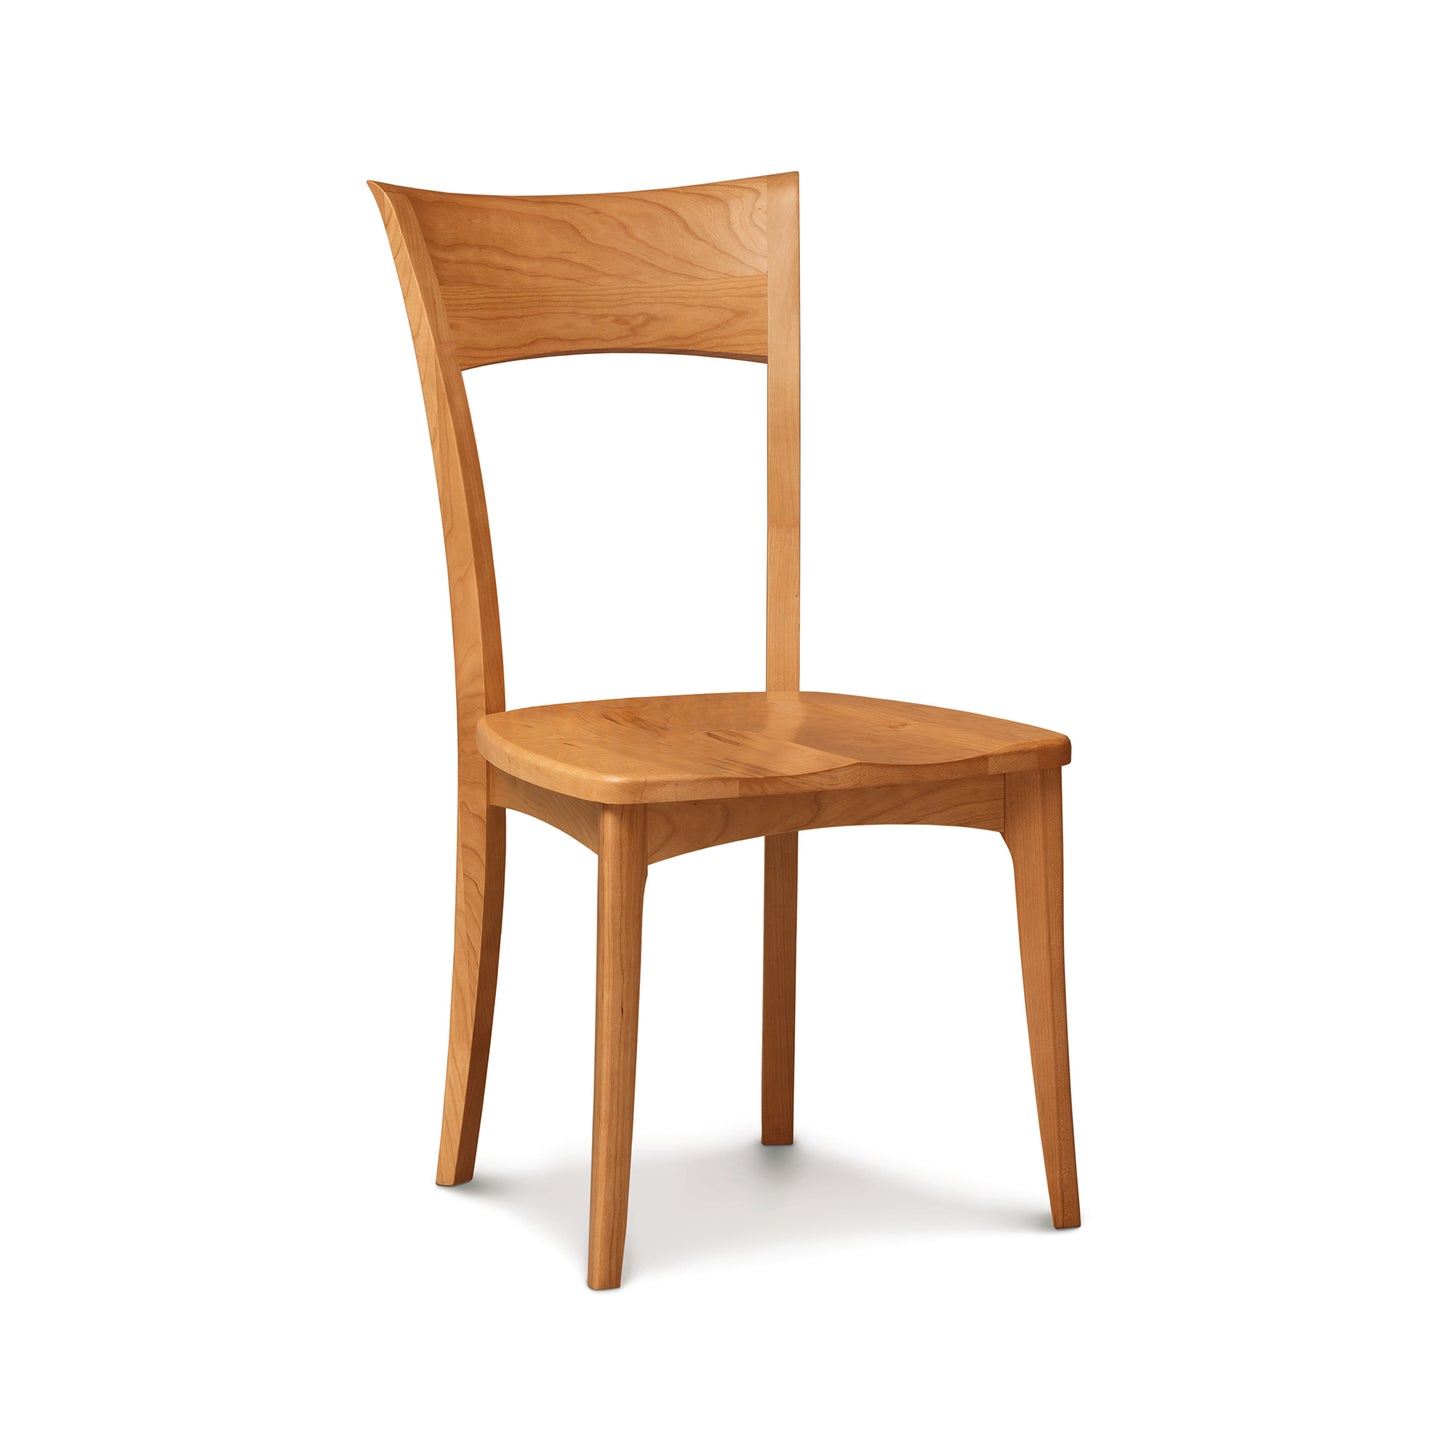 A Ingrid Shaker Chair with Wood Seat dining chair with a curved backrest and four legs, crafted from American cherry wood, isolated on a white background. Brand: Copeland Furniture